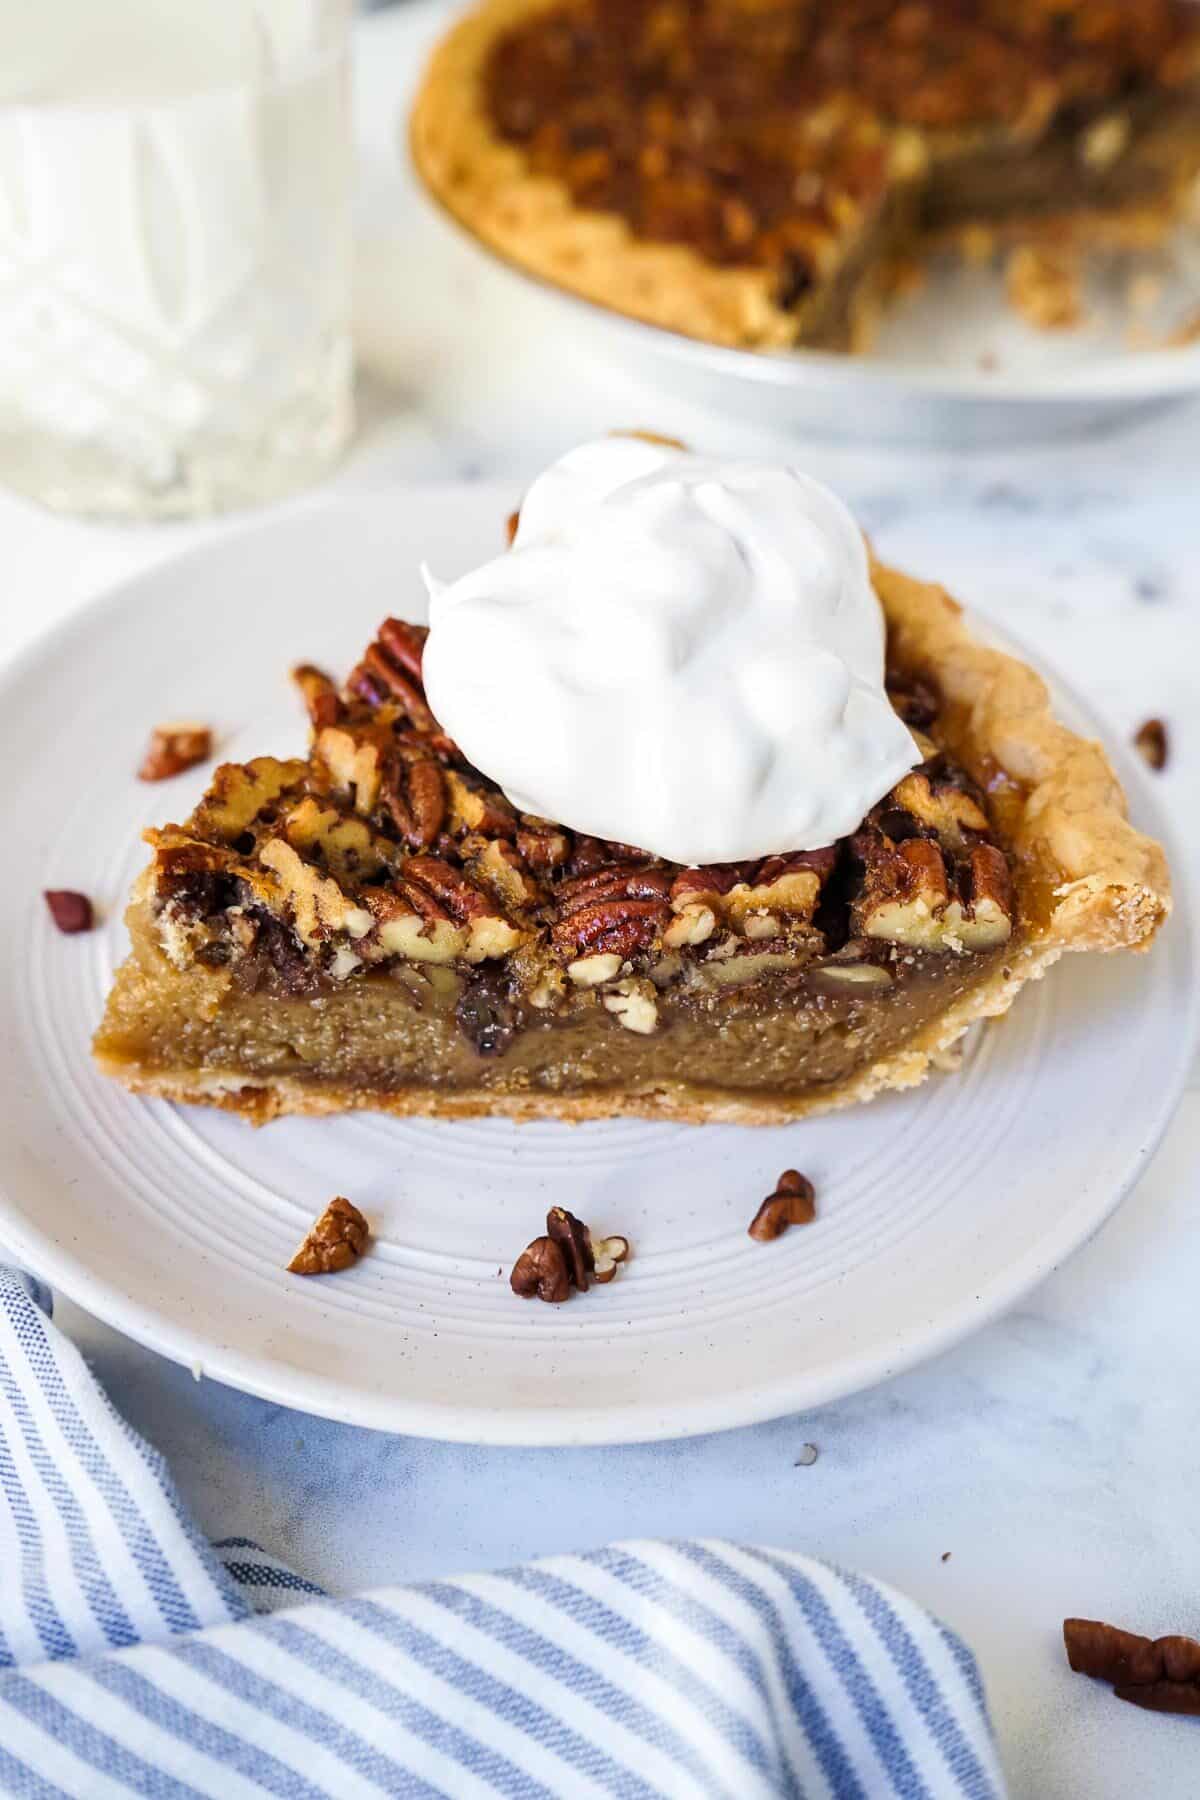 Pecan pie with whipped cream on a white plate.